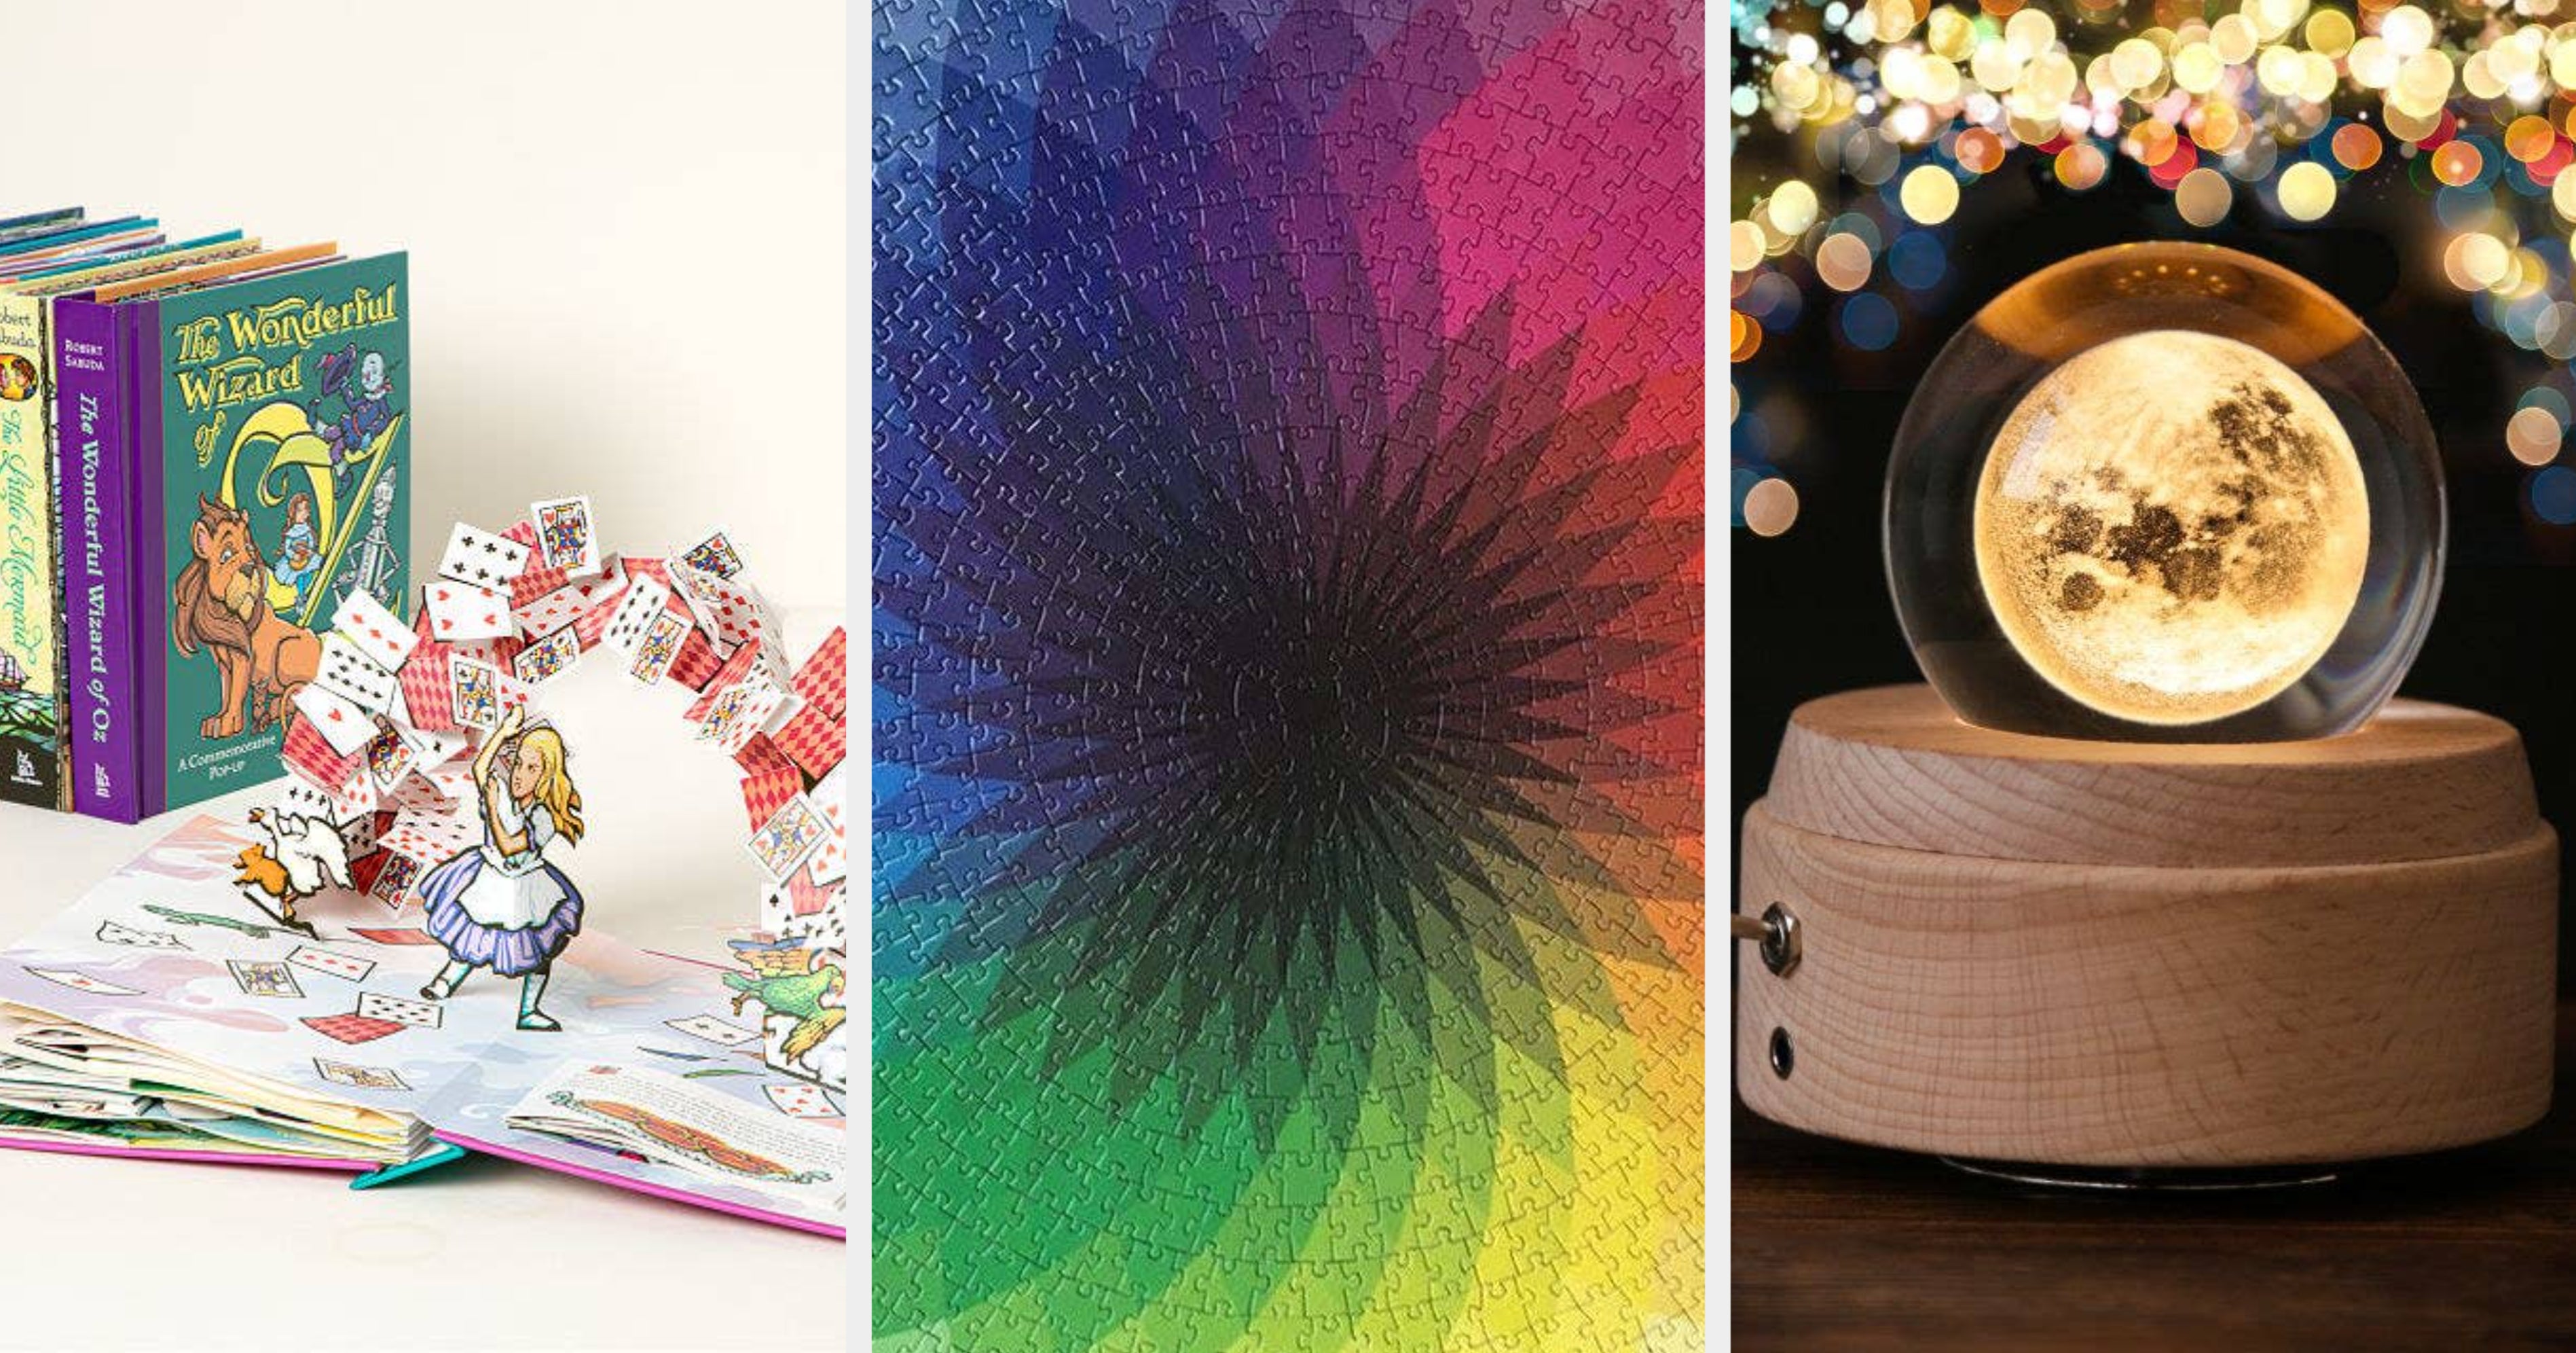 55 Unexpected Gifts That'll Put Santa To Shame